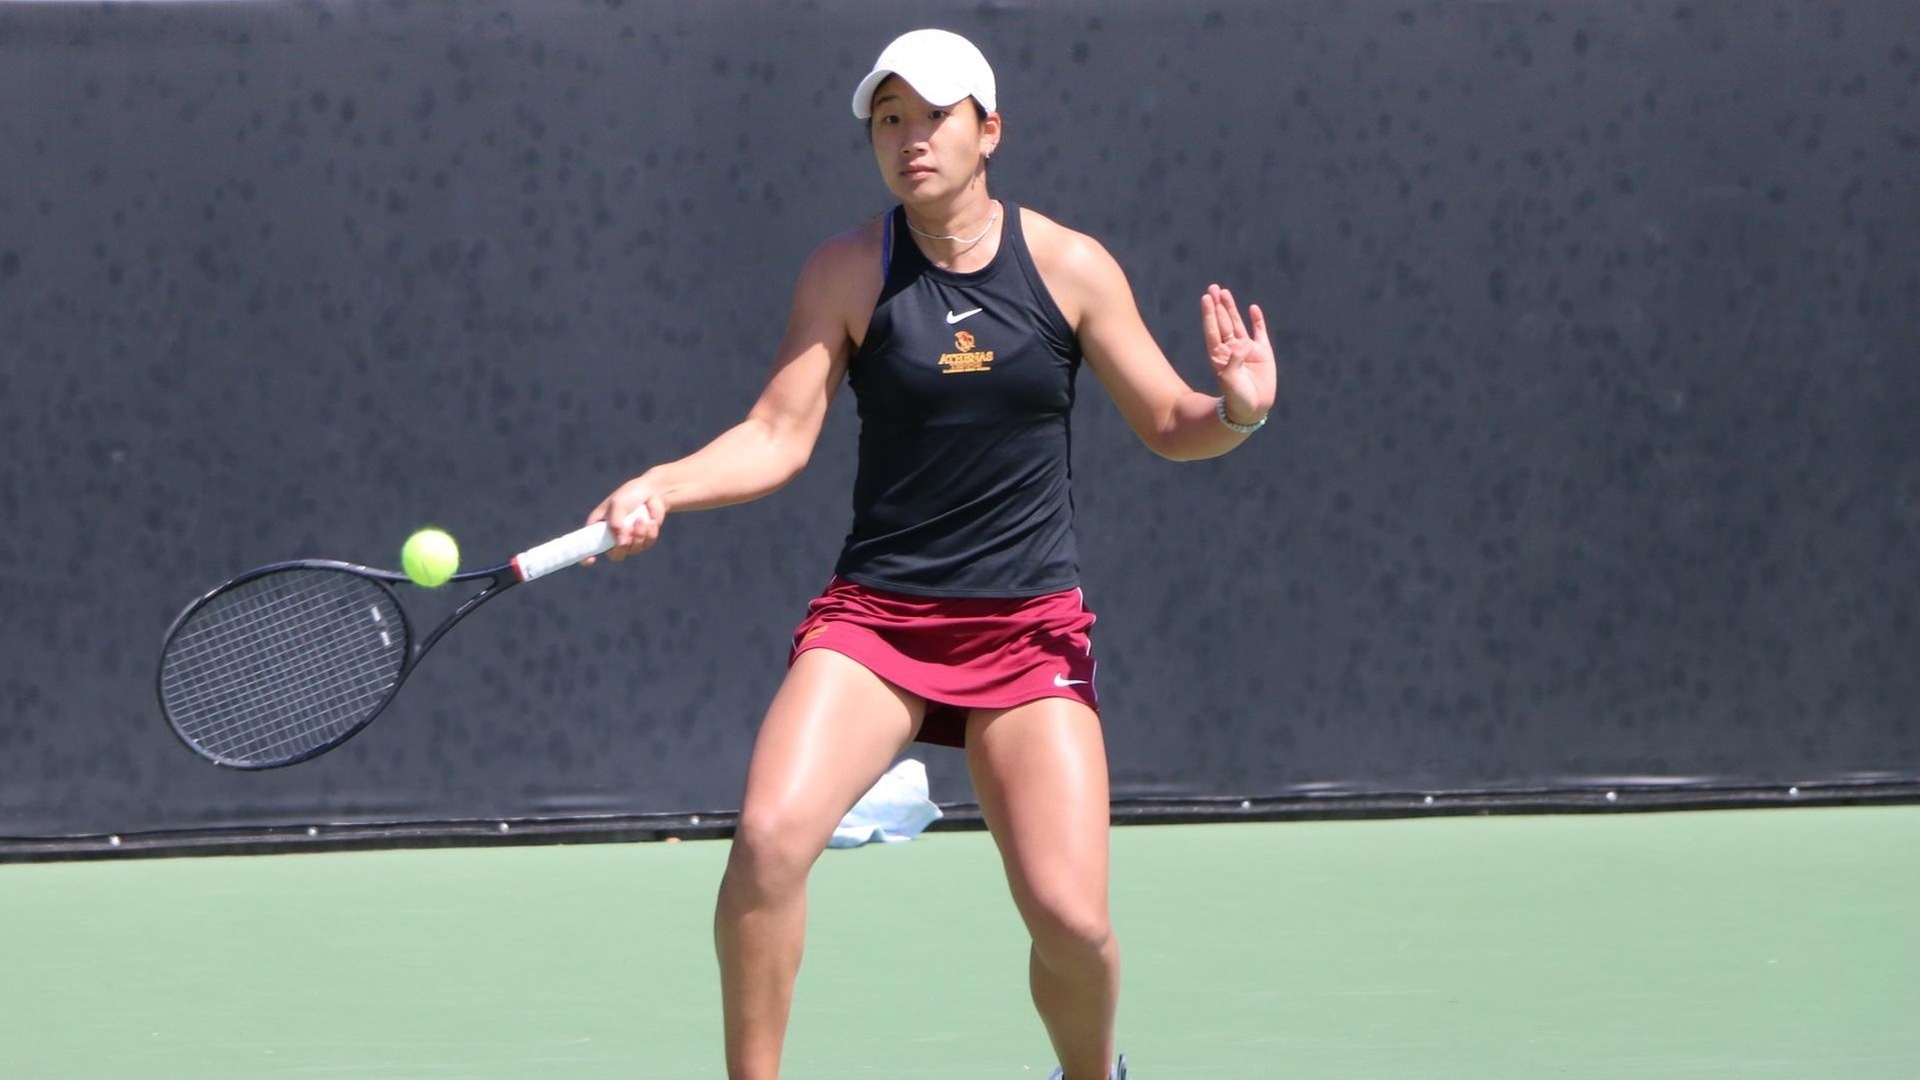 Audrey Yoon only dropped three games in four sets (6-3, 6-0, 6-0, 6-0)